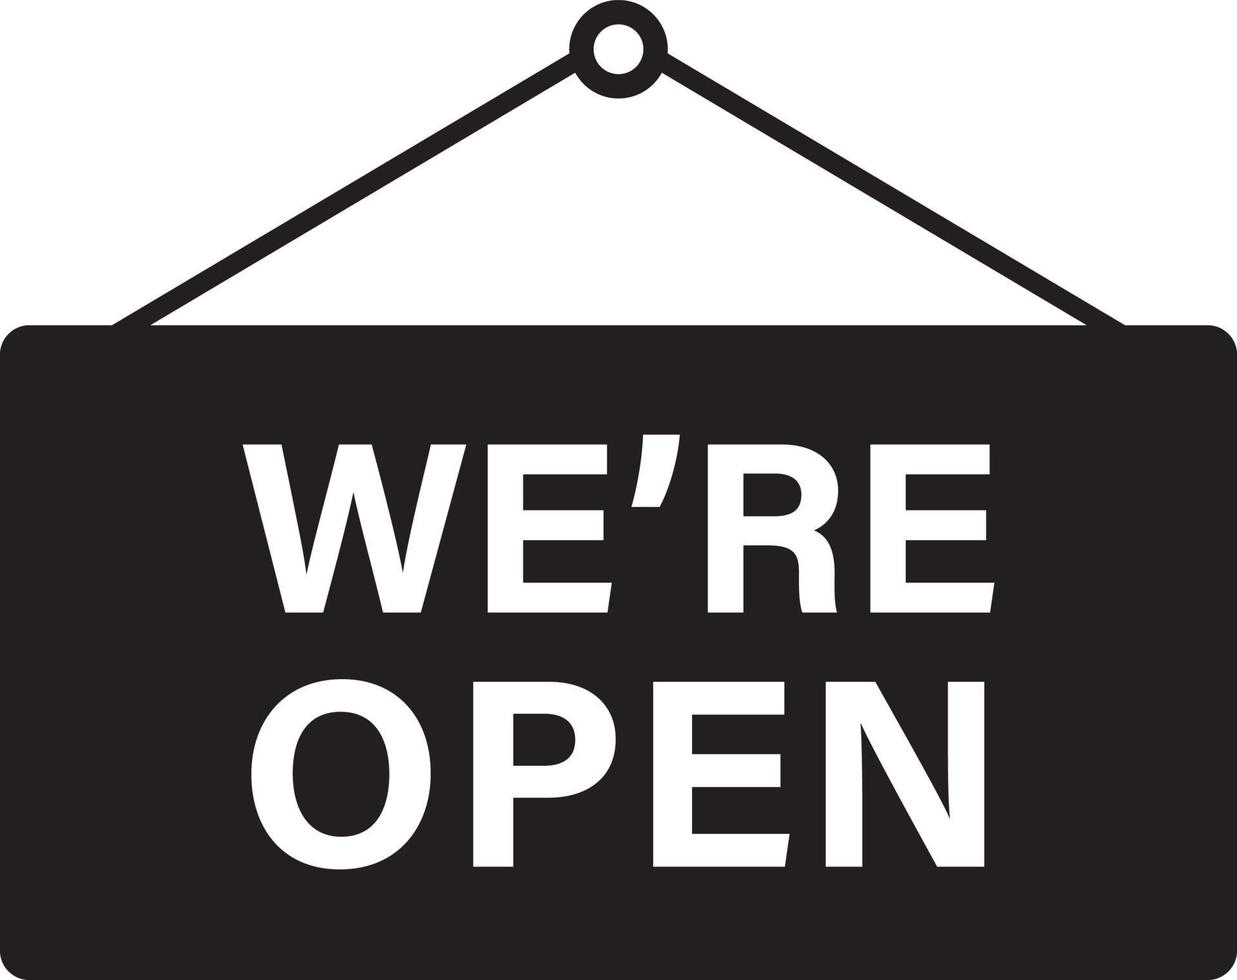 We are open sign vector